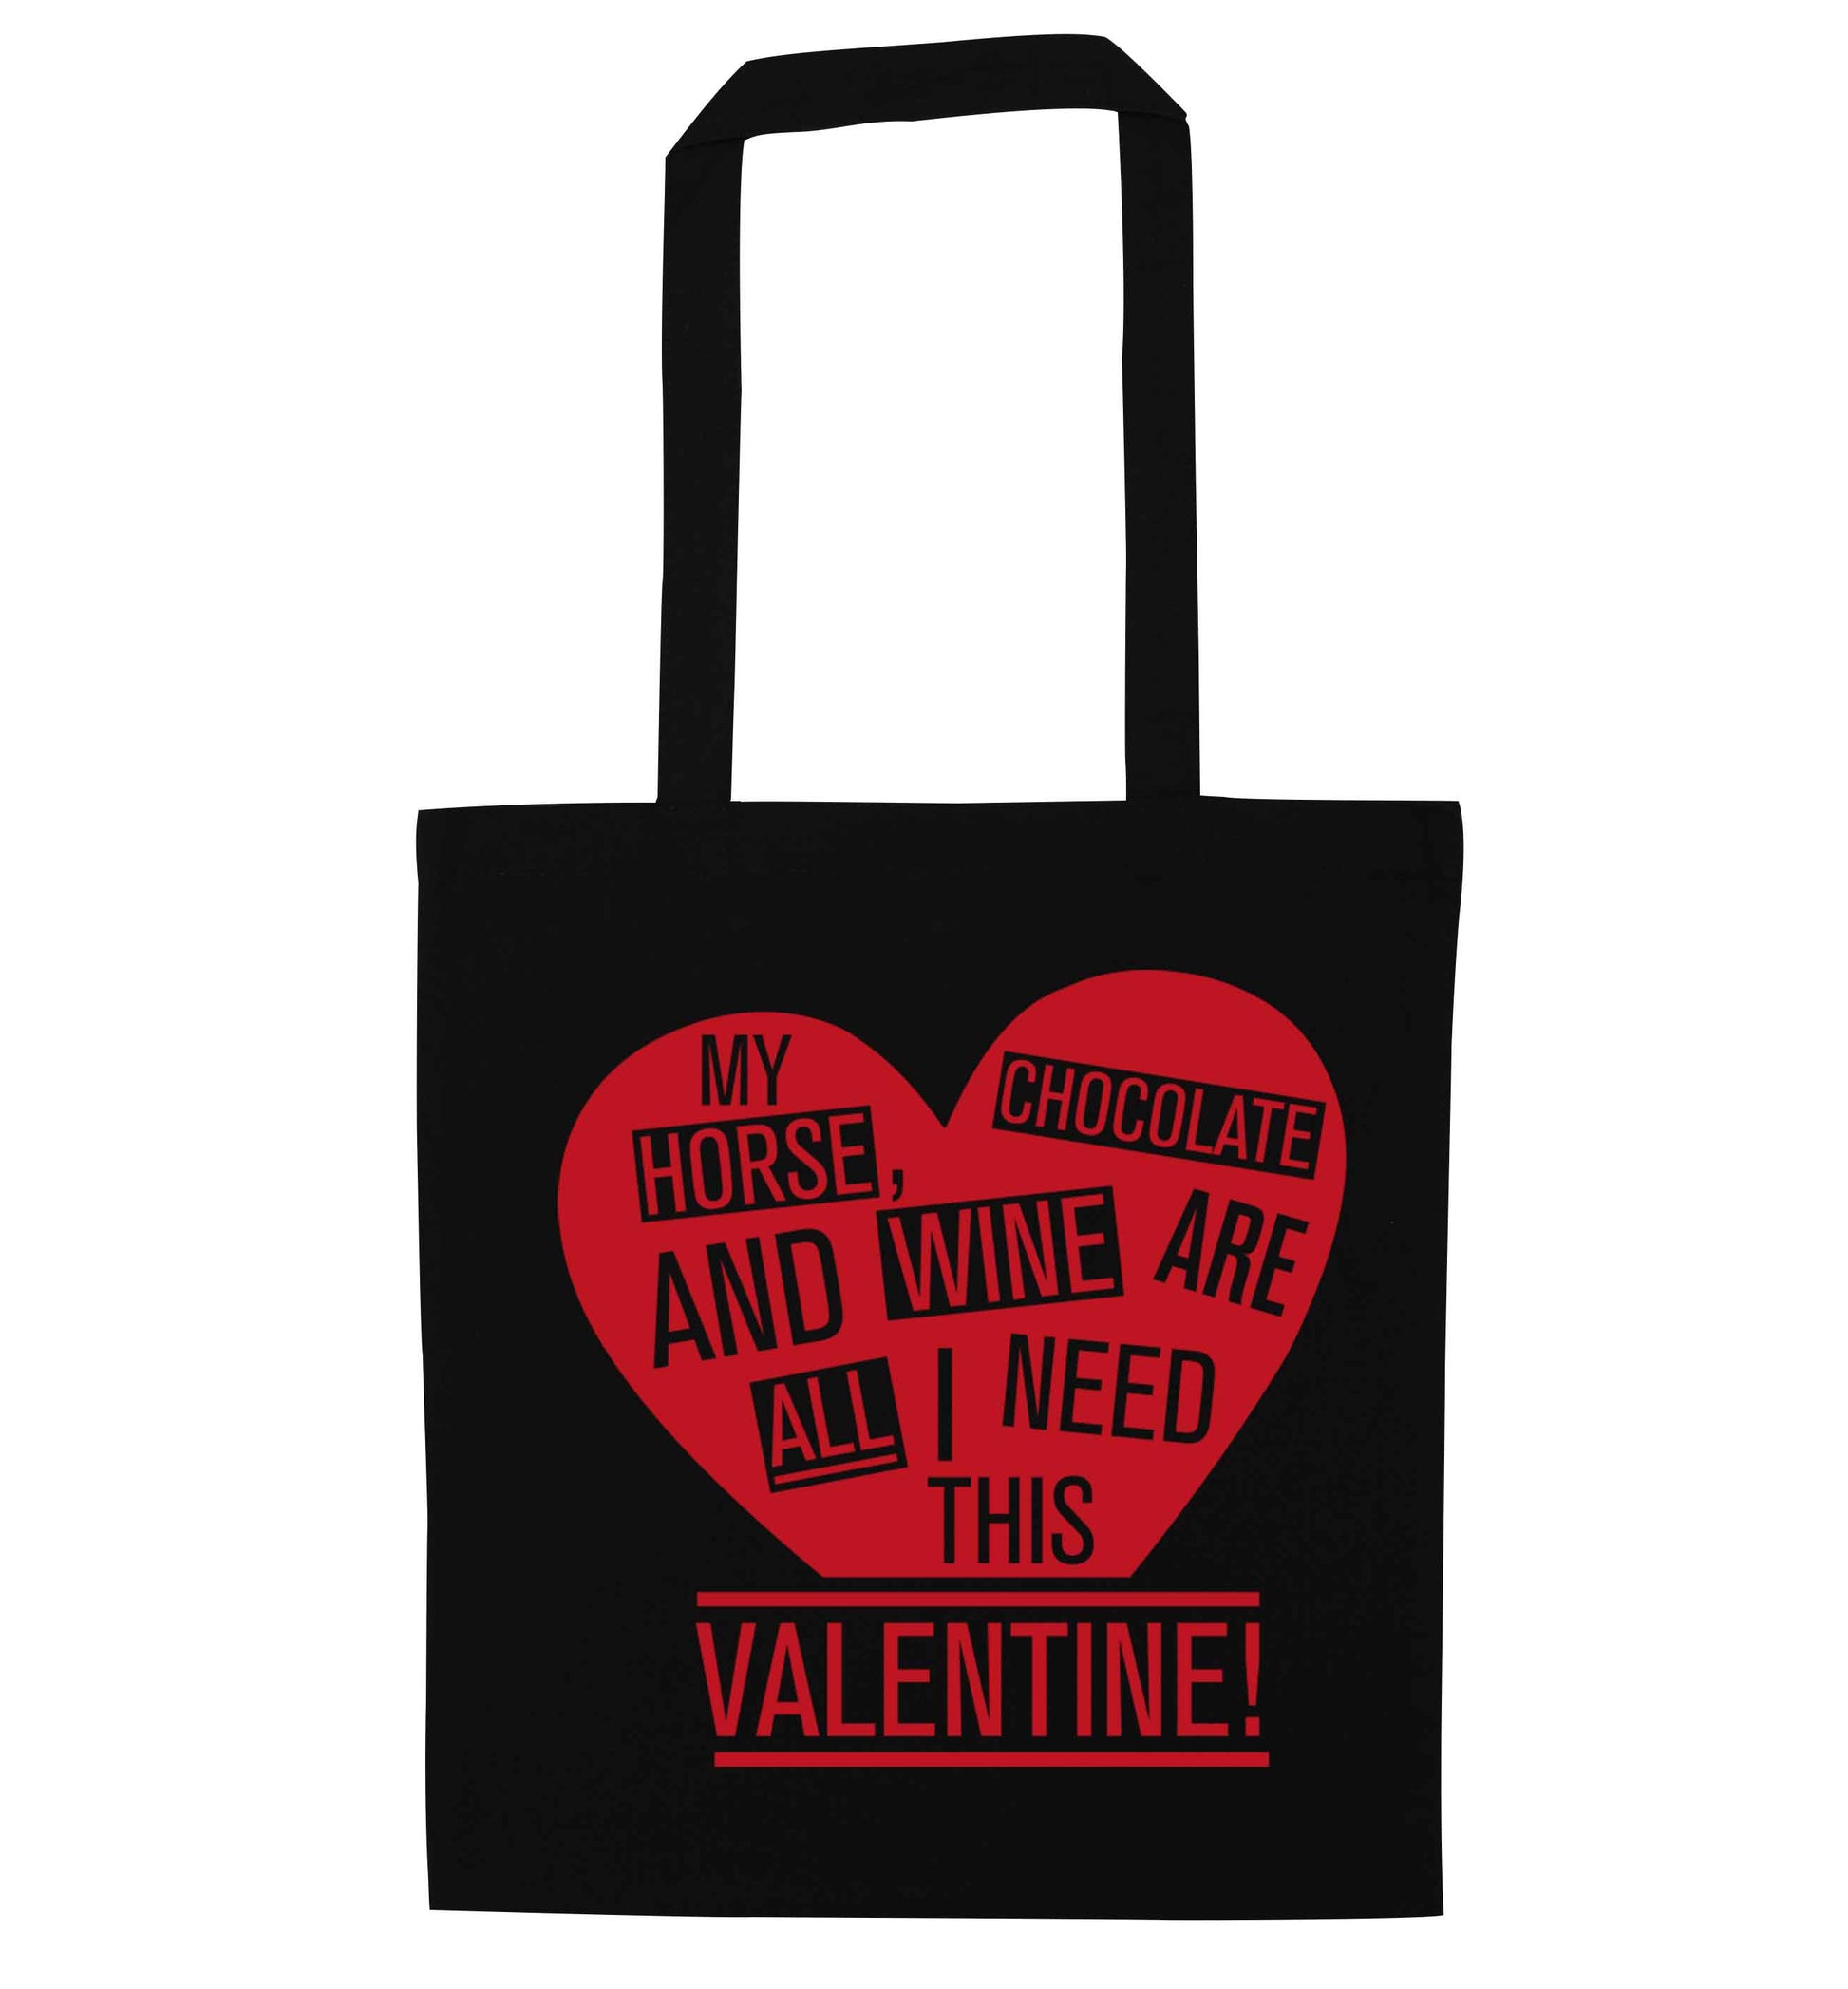 My horse chocolate and wine are all I need this valentine black tote bag